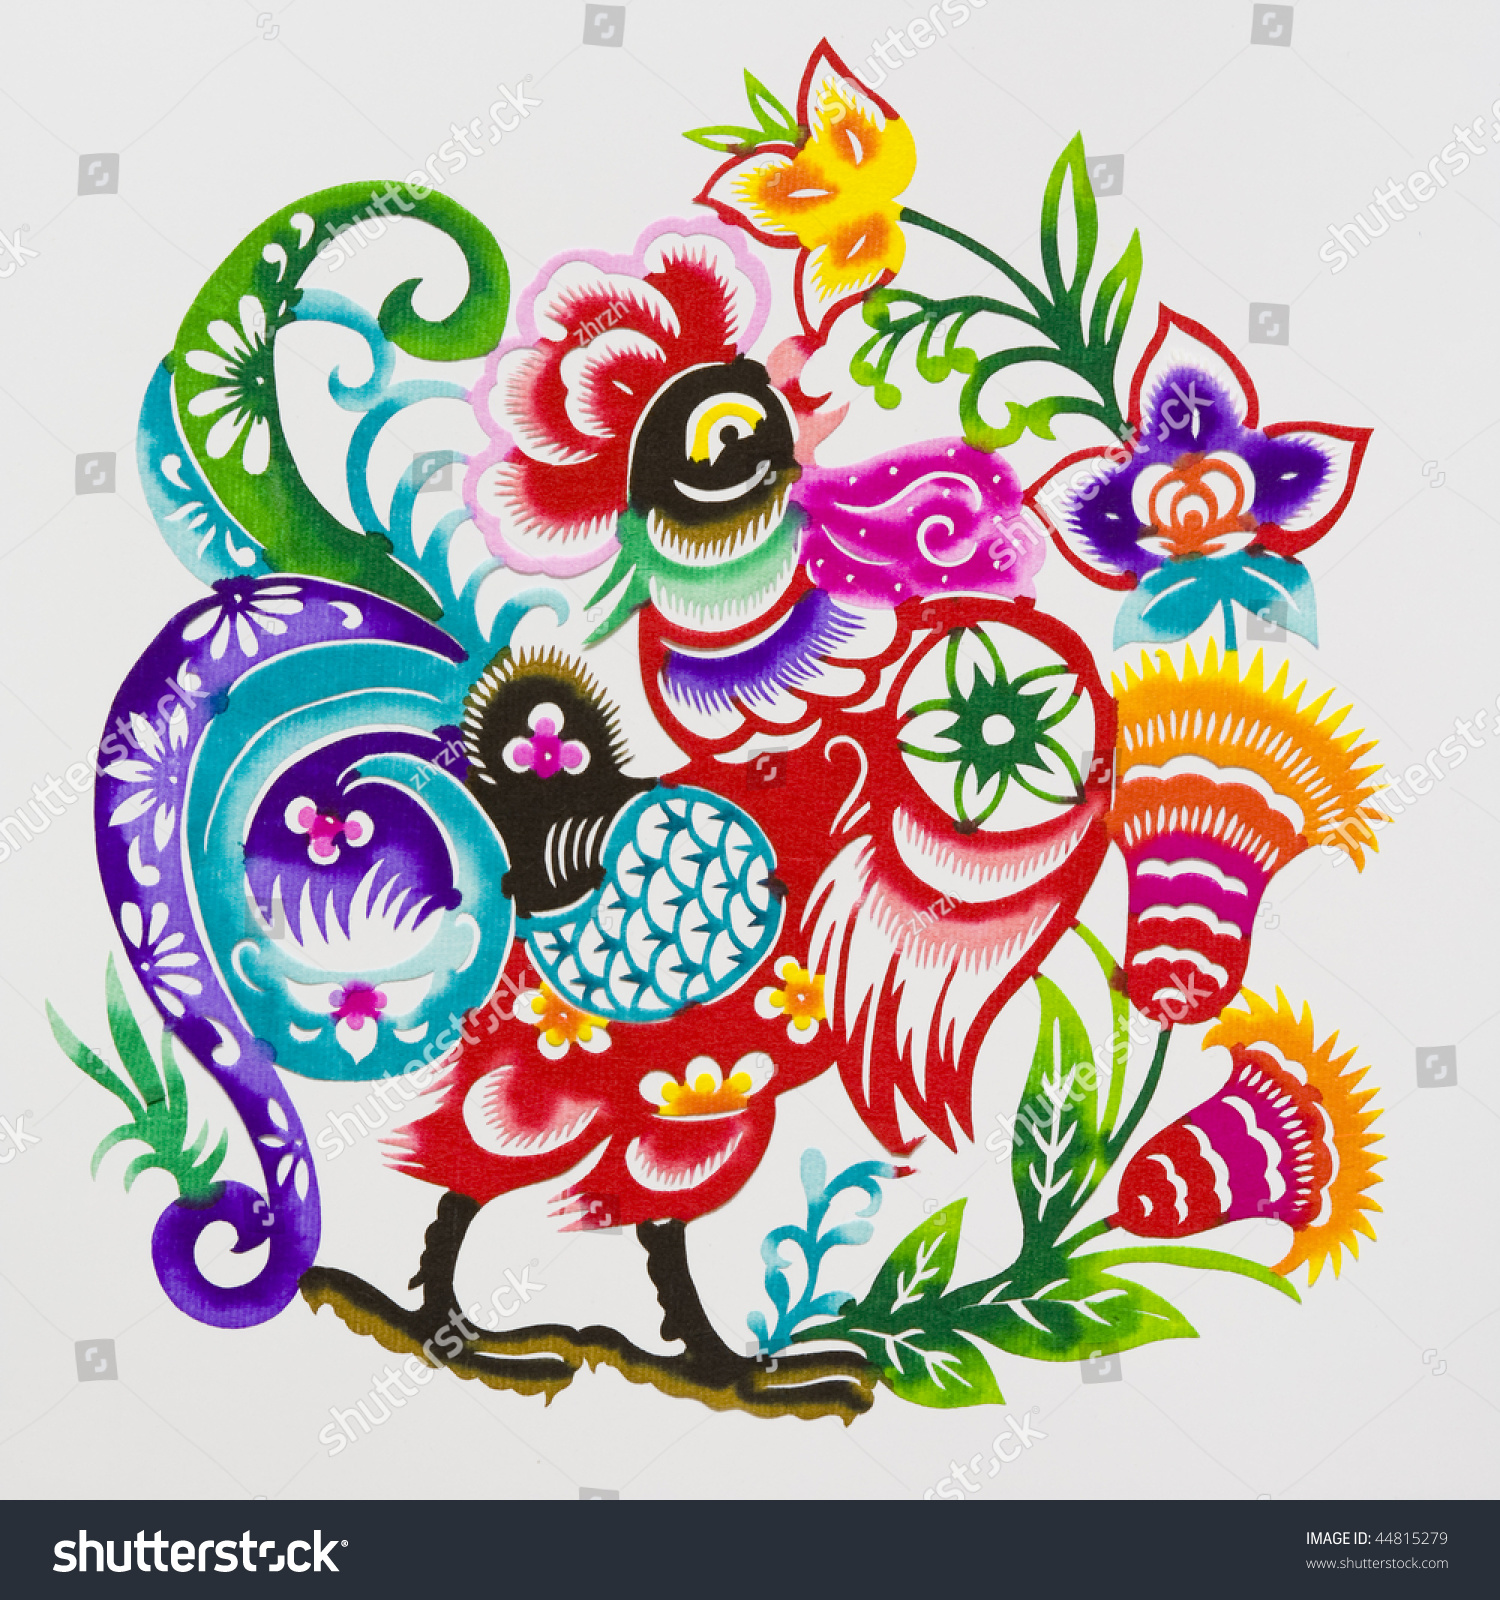 Rooster,This Is A Picture Of Chinese Paper Cutting, Representing The ...